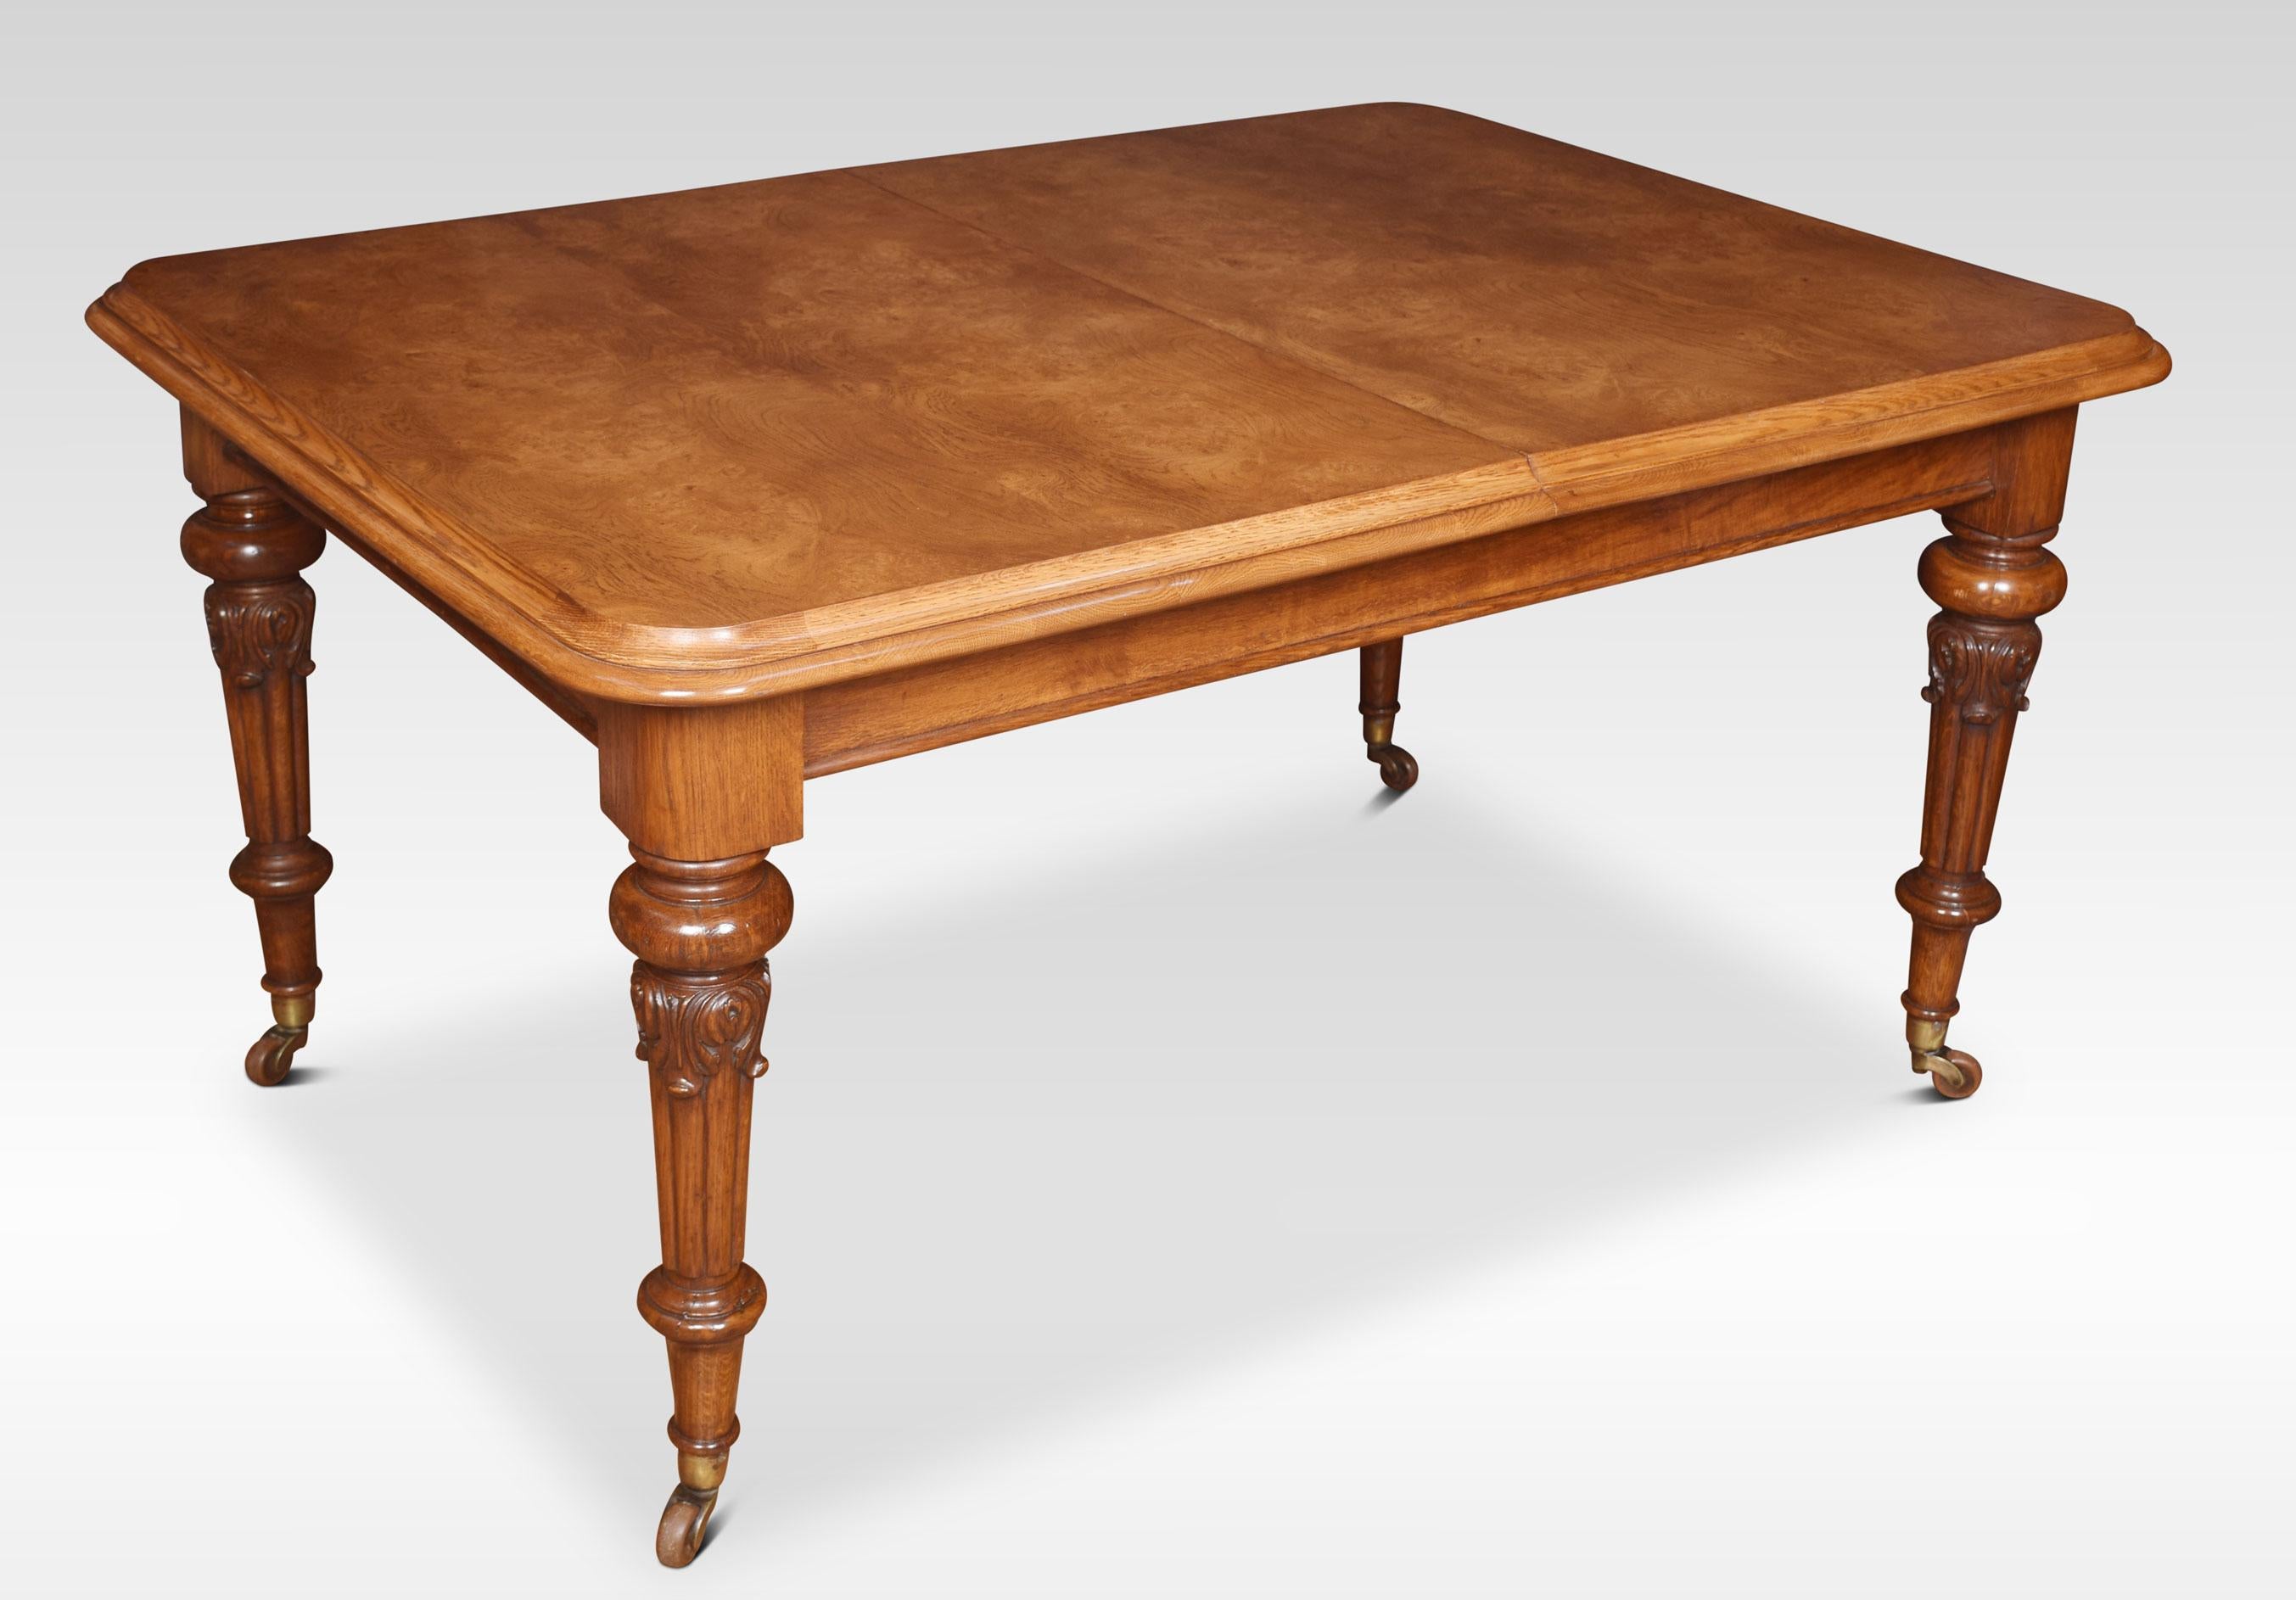 19th century pollard oak extending dining table, the rectangular top with a molded edge. The telescopic action opens to incorporate two large leaves. All raised up on four turned tapering legs with brass terminals and ceramic casters will seat 10 –